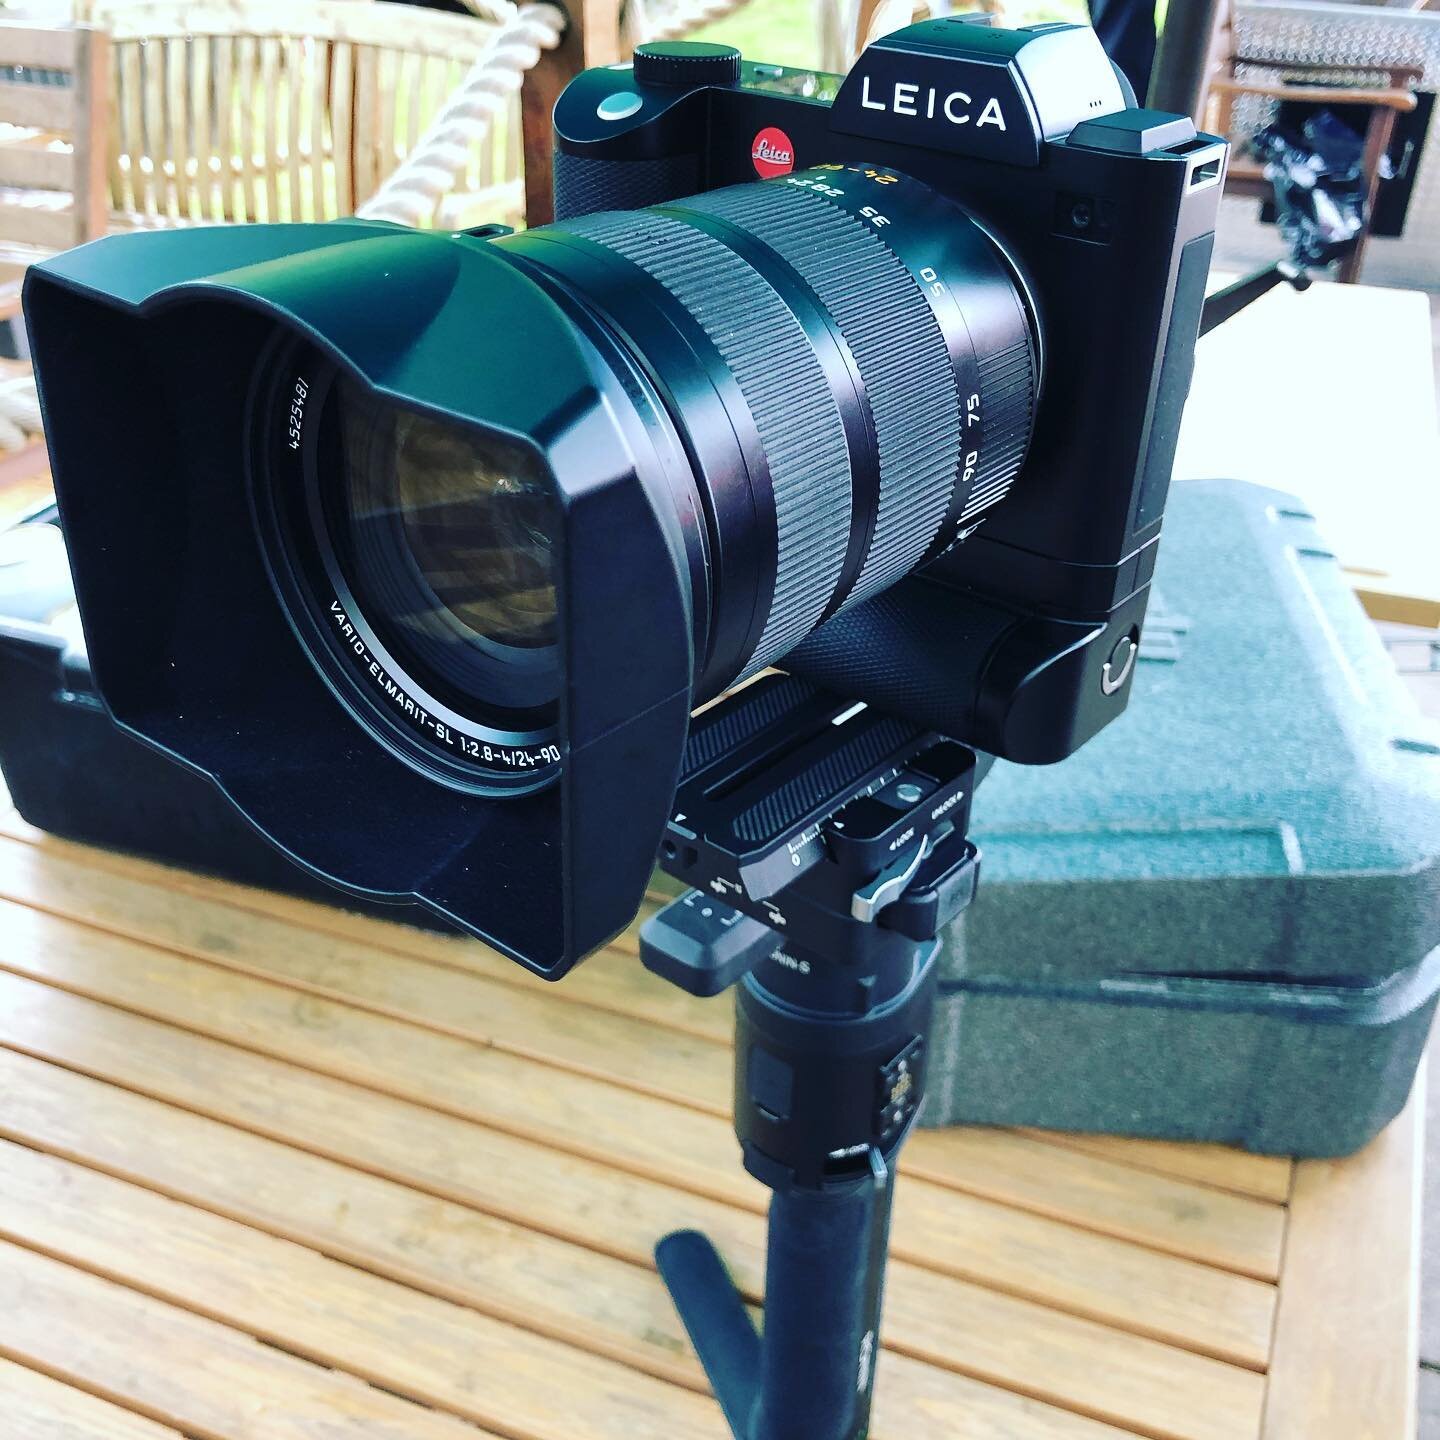 Today&rsquo;s setup for video and stills. The Leica SL and the Ronin S. Gorgeous footage and images. Get this damn Corona Virus crap done so I can move to the SL II. You&rsquo;ll see some amazing stuff from it. .
.
. .
.
@scottharben
#scottharbenphot